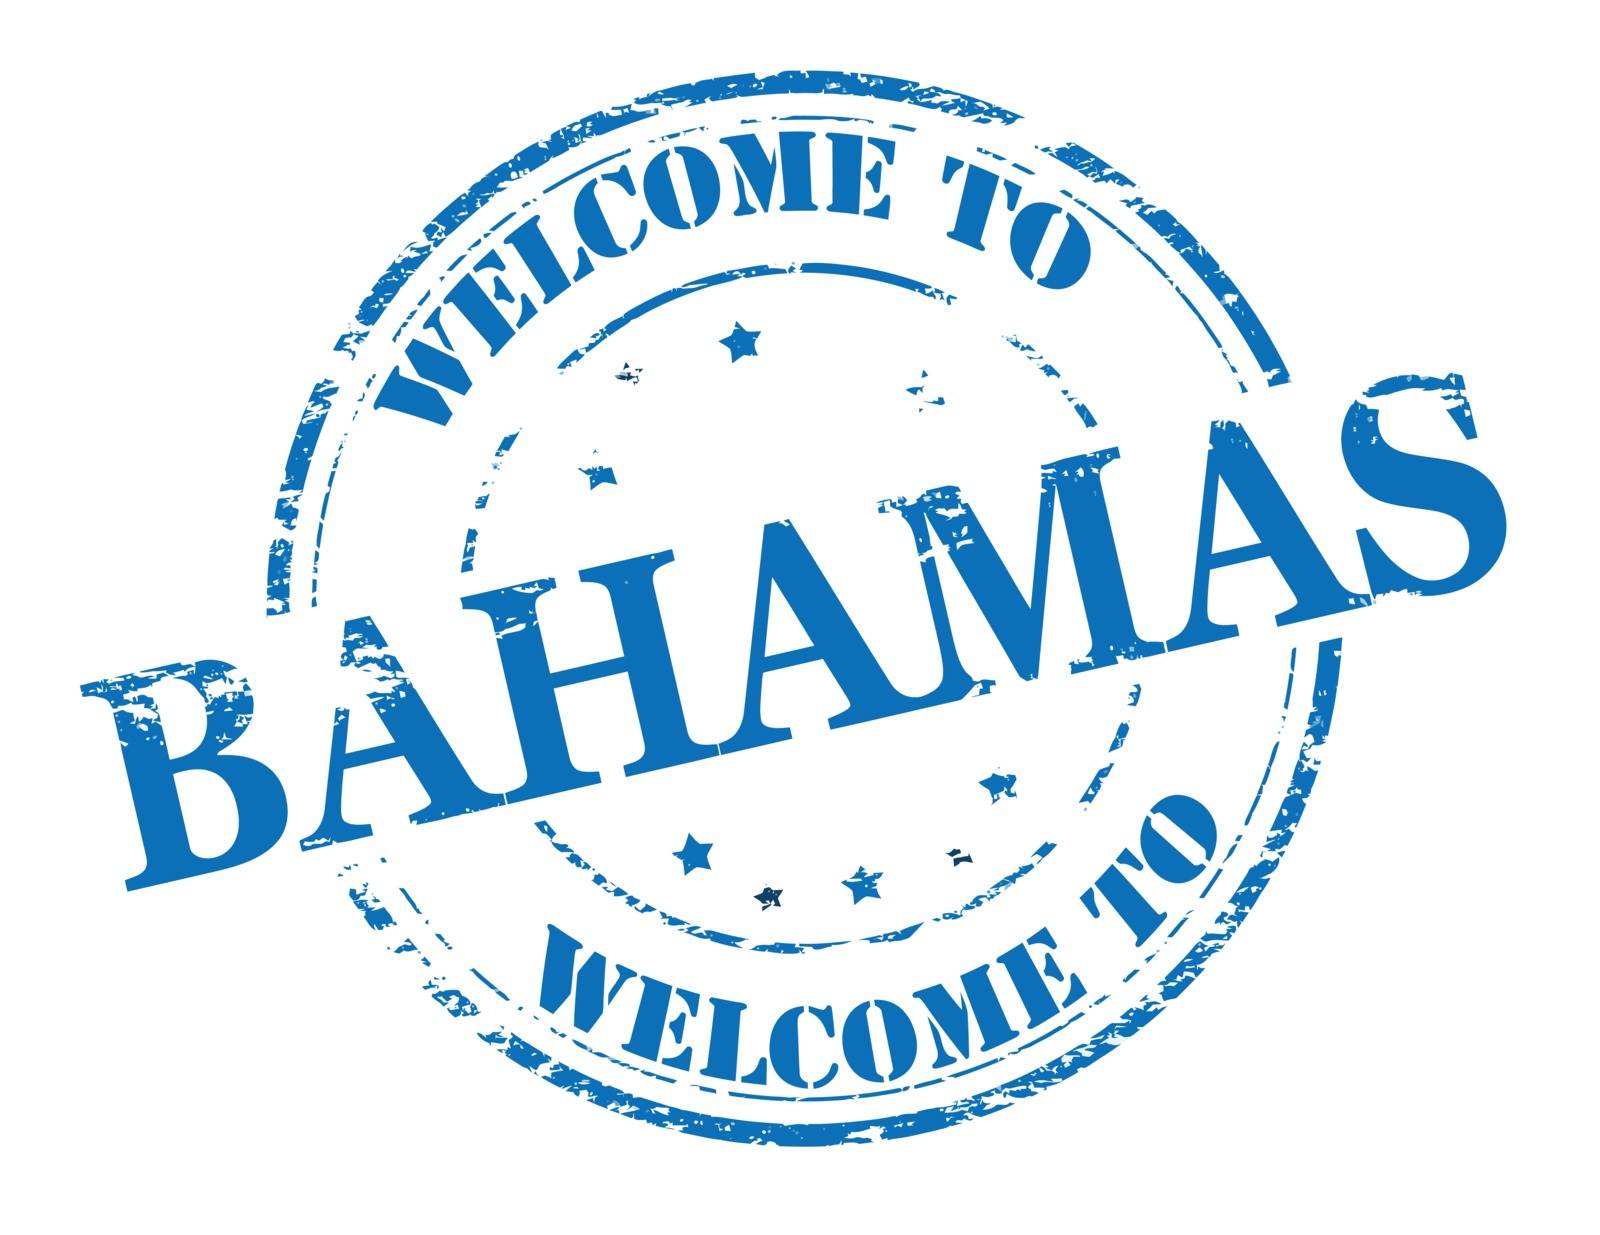 Rubber stamp with text welcome to Bahamas inside, vector illustration